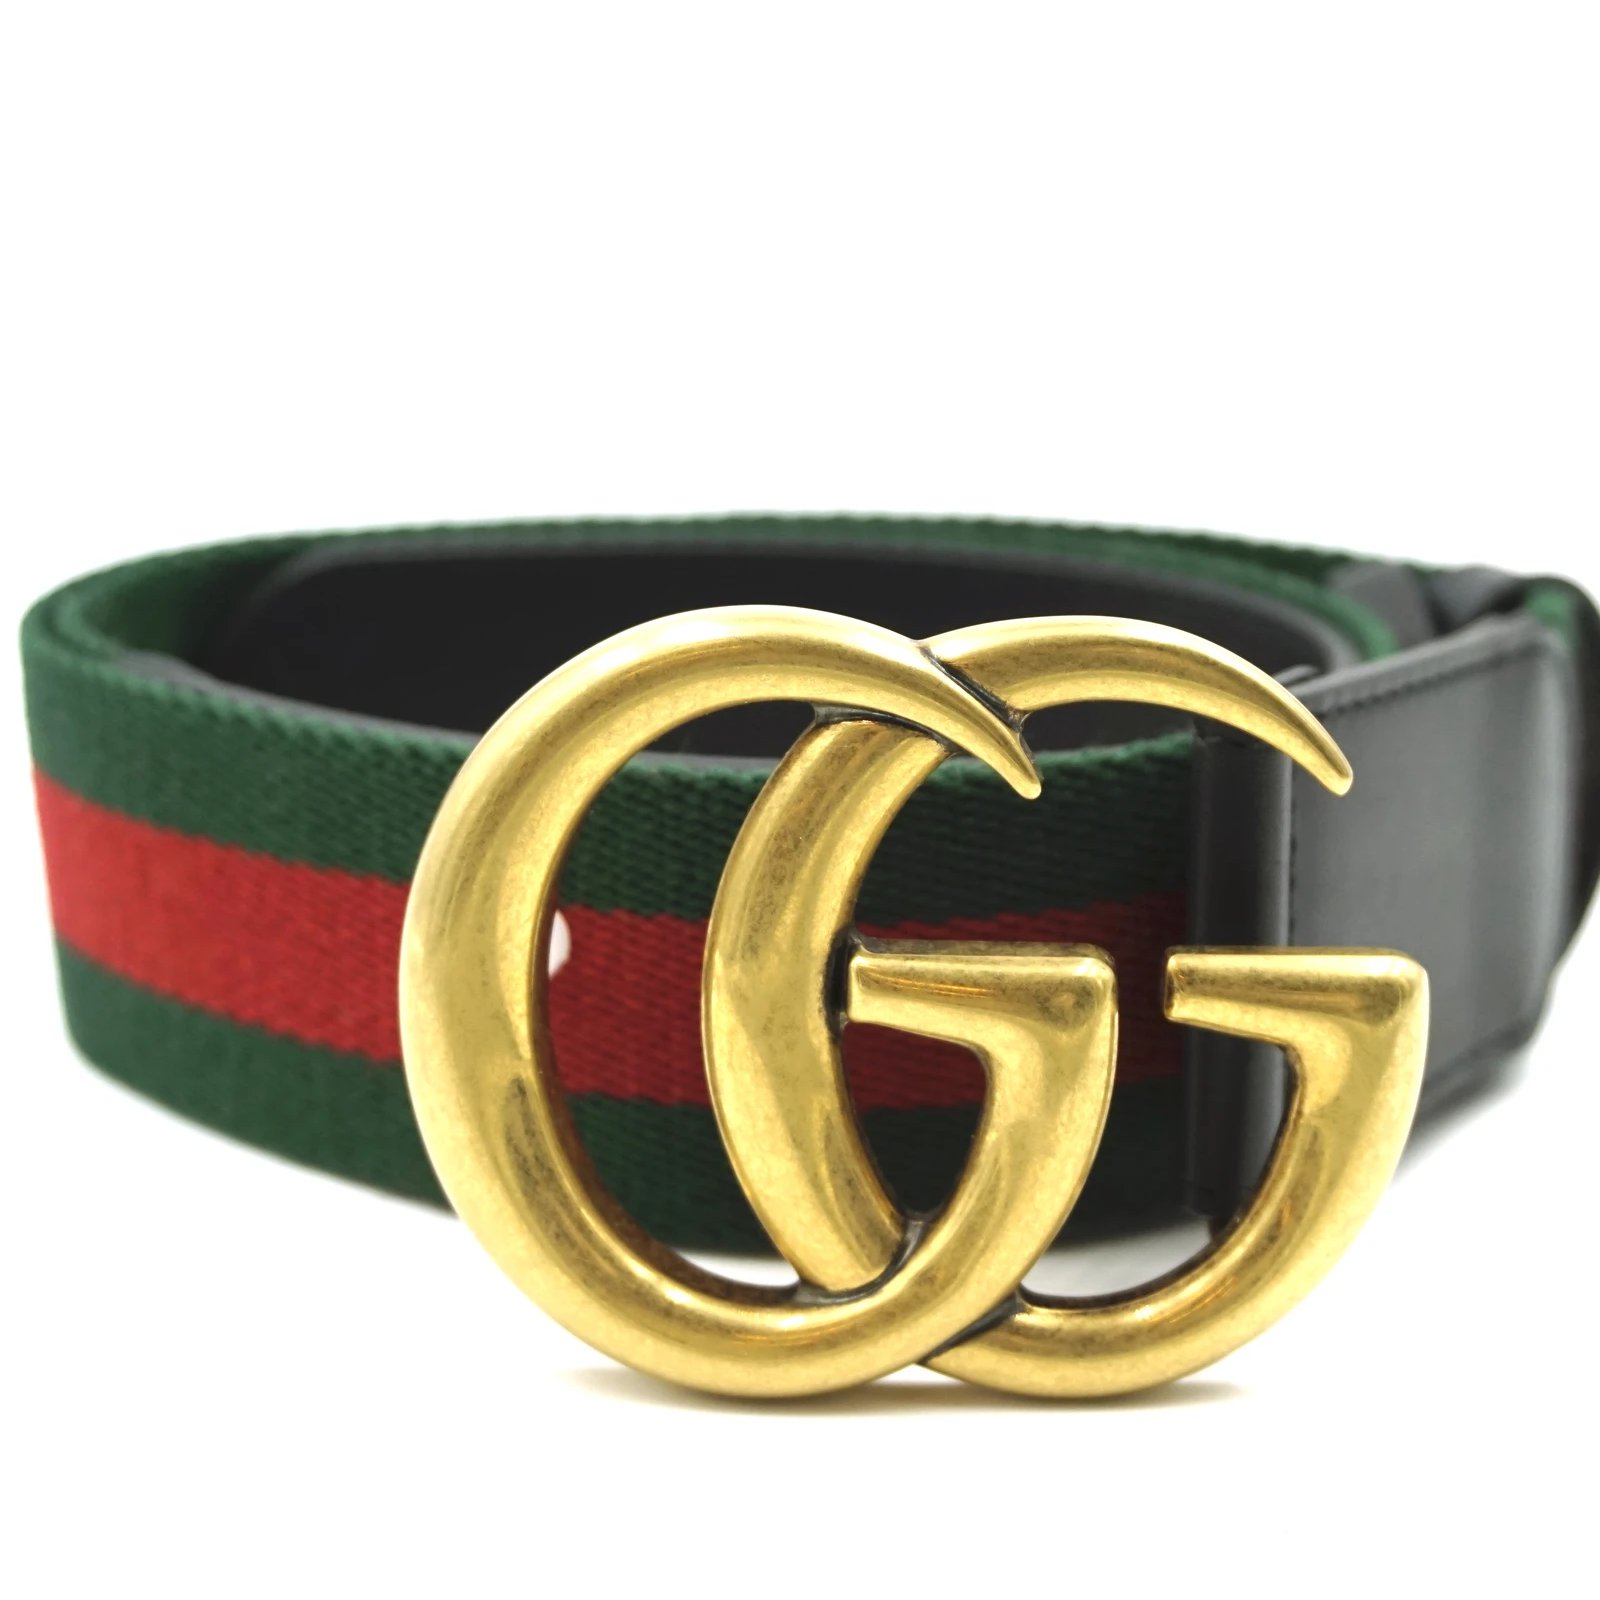 AJF.gucci belt red and green gold buckle,OFF 59% - www.concordehotels ...